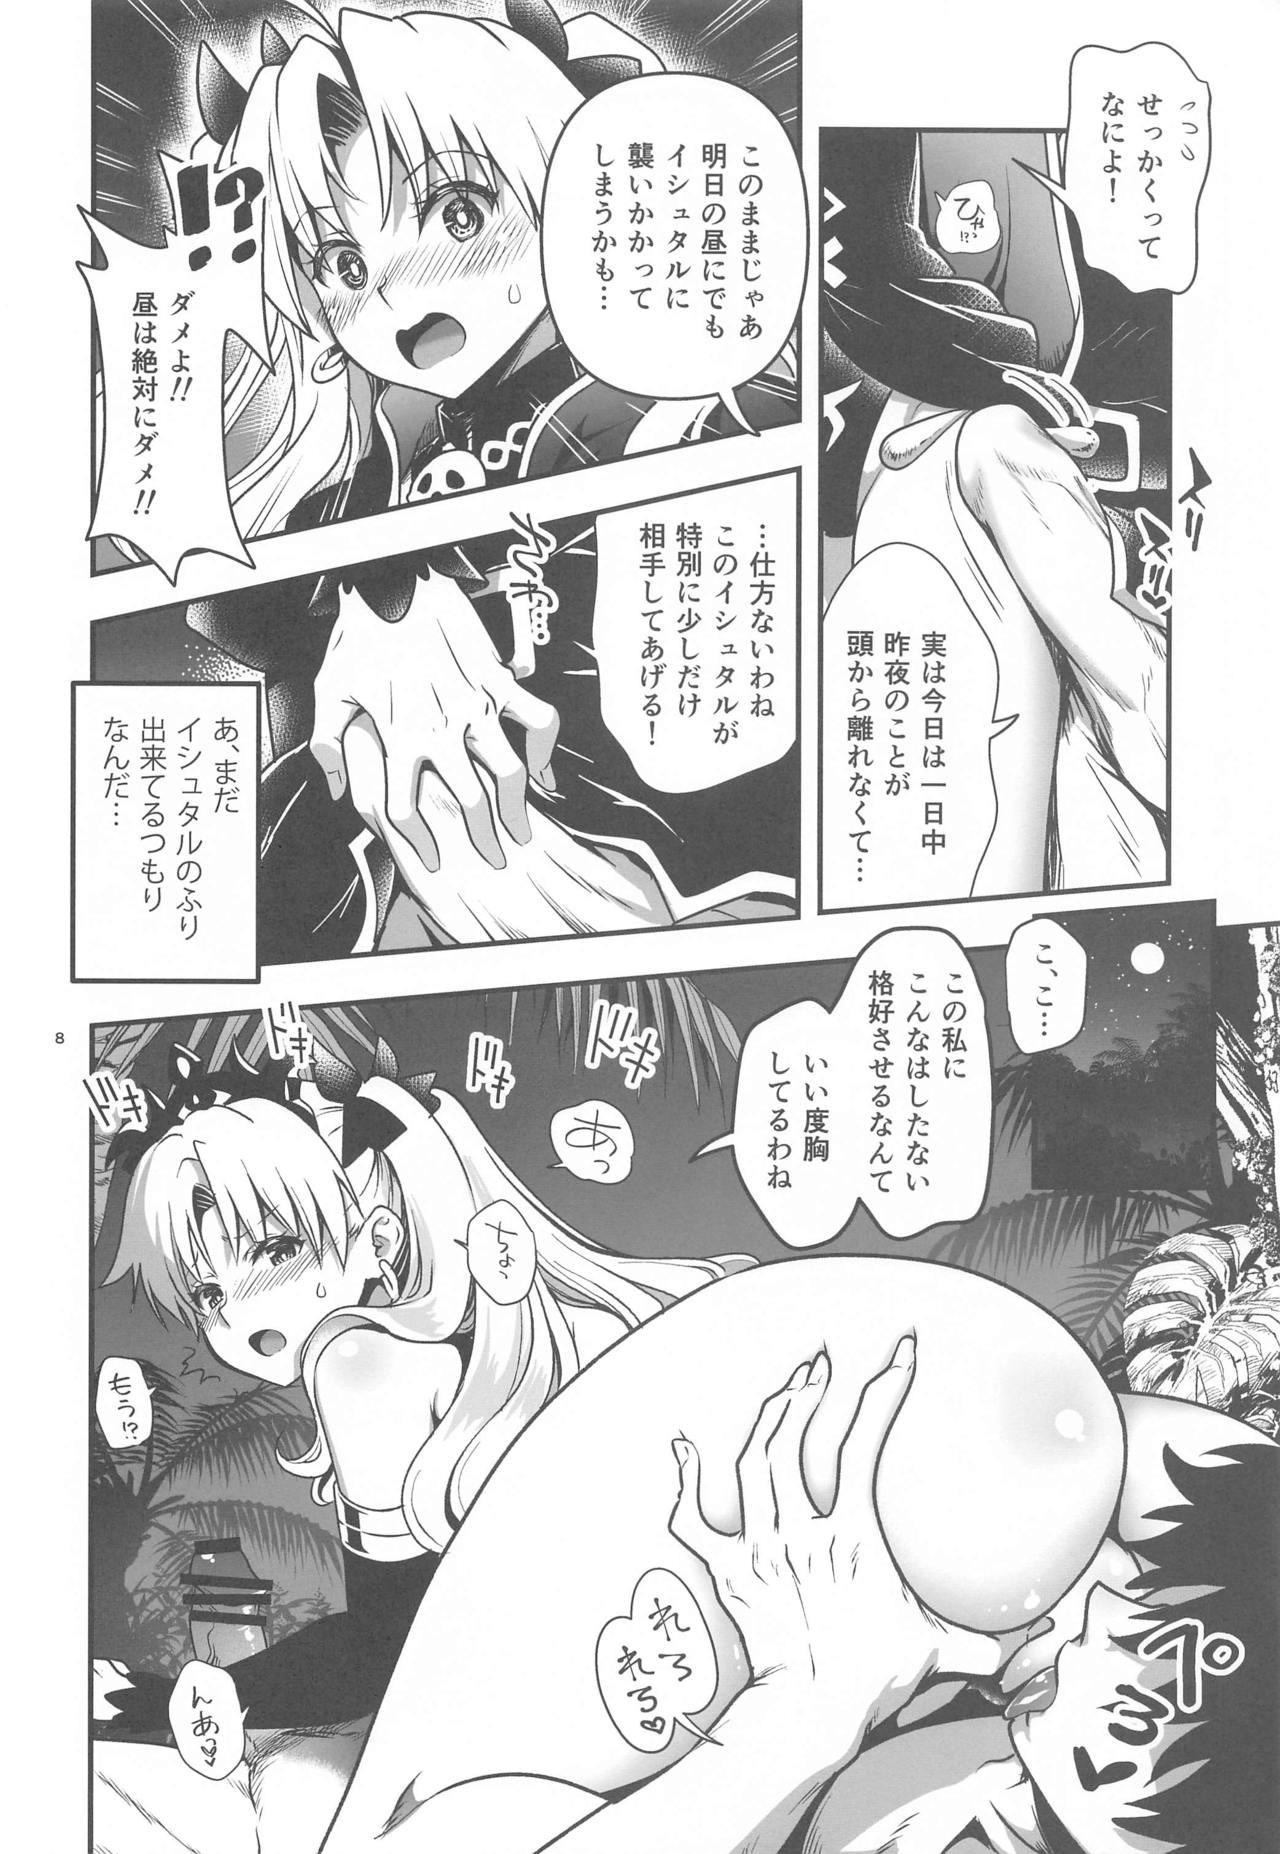 Facial All Night Romance 2 - Fate grand order Dutch - Page 7